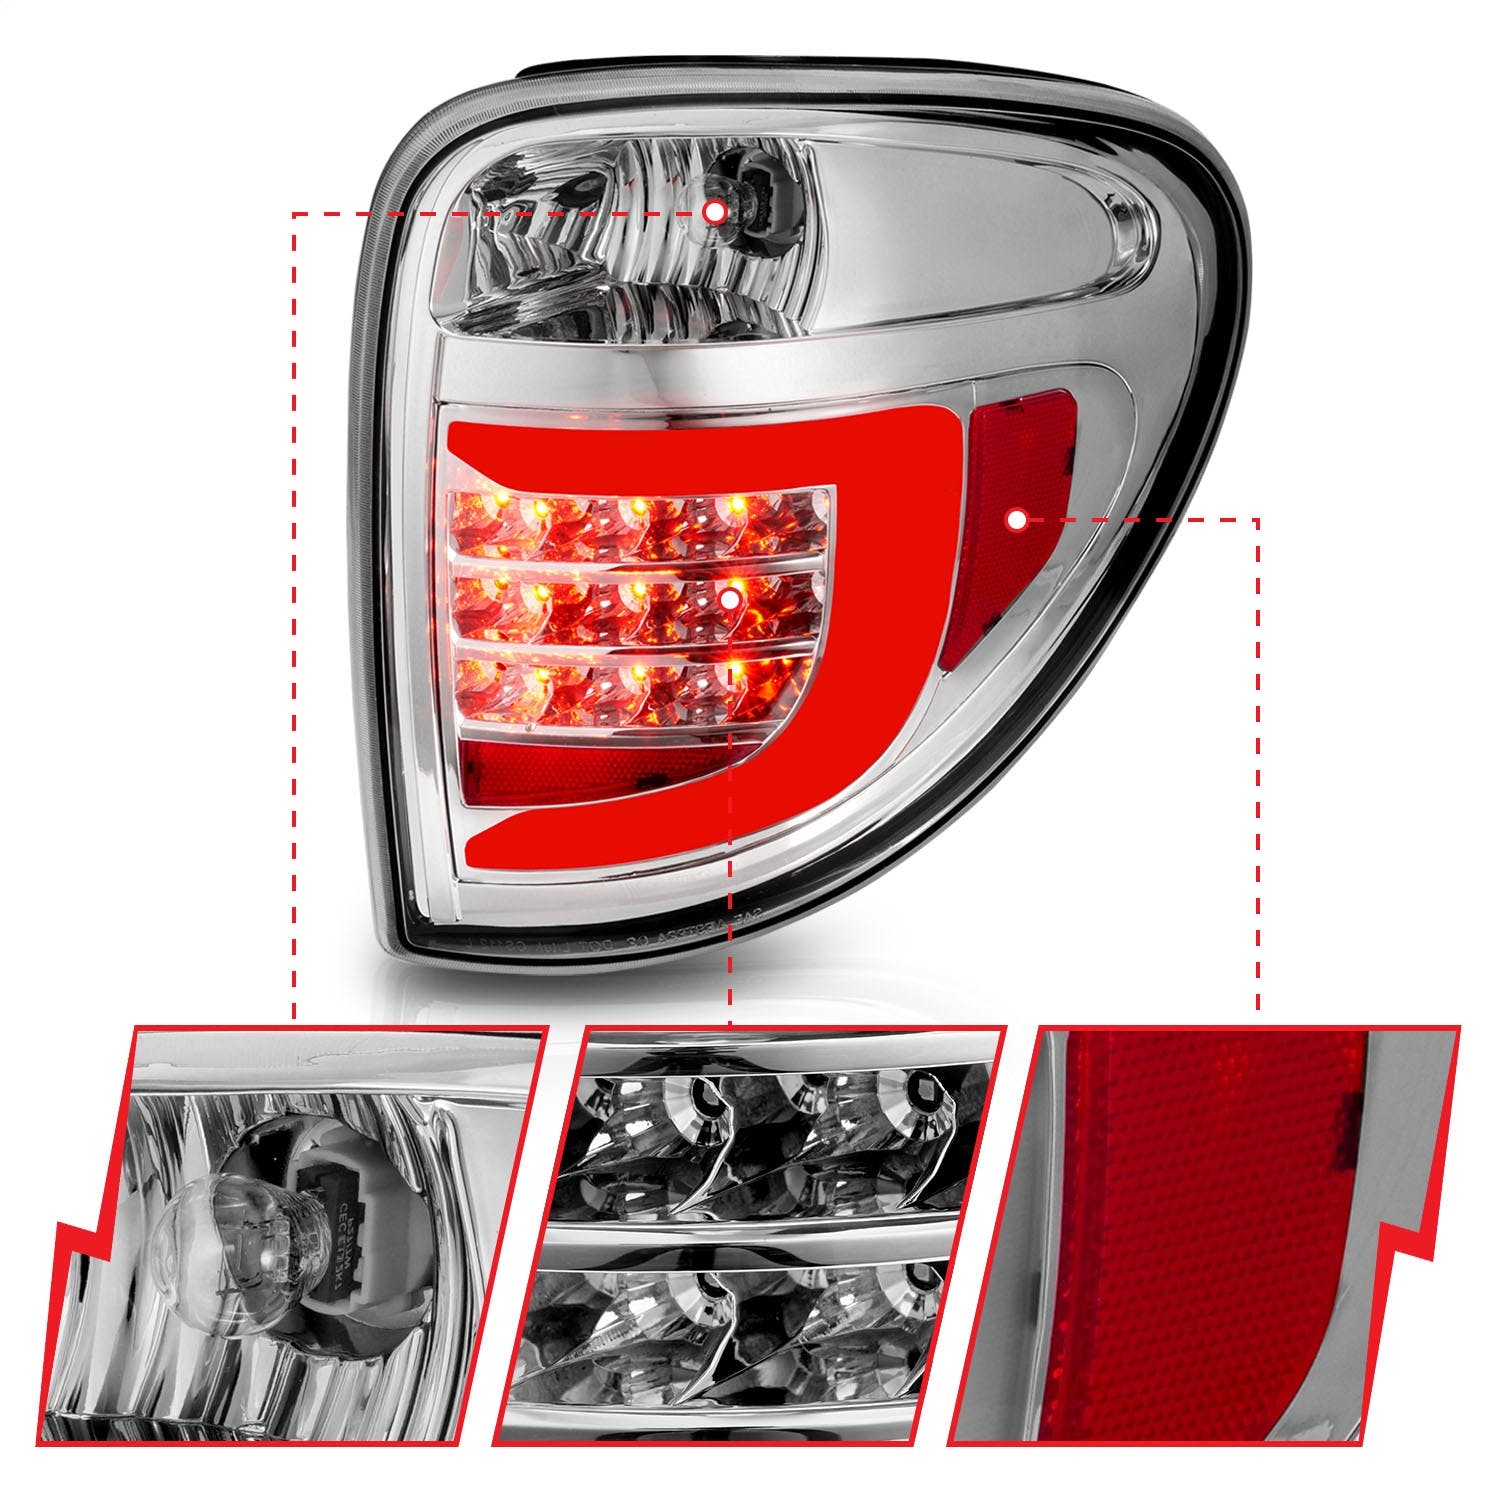 AnzoUSA 311367 LED Tail Lights with Light Bar Chrome Housing Clear Lens